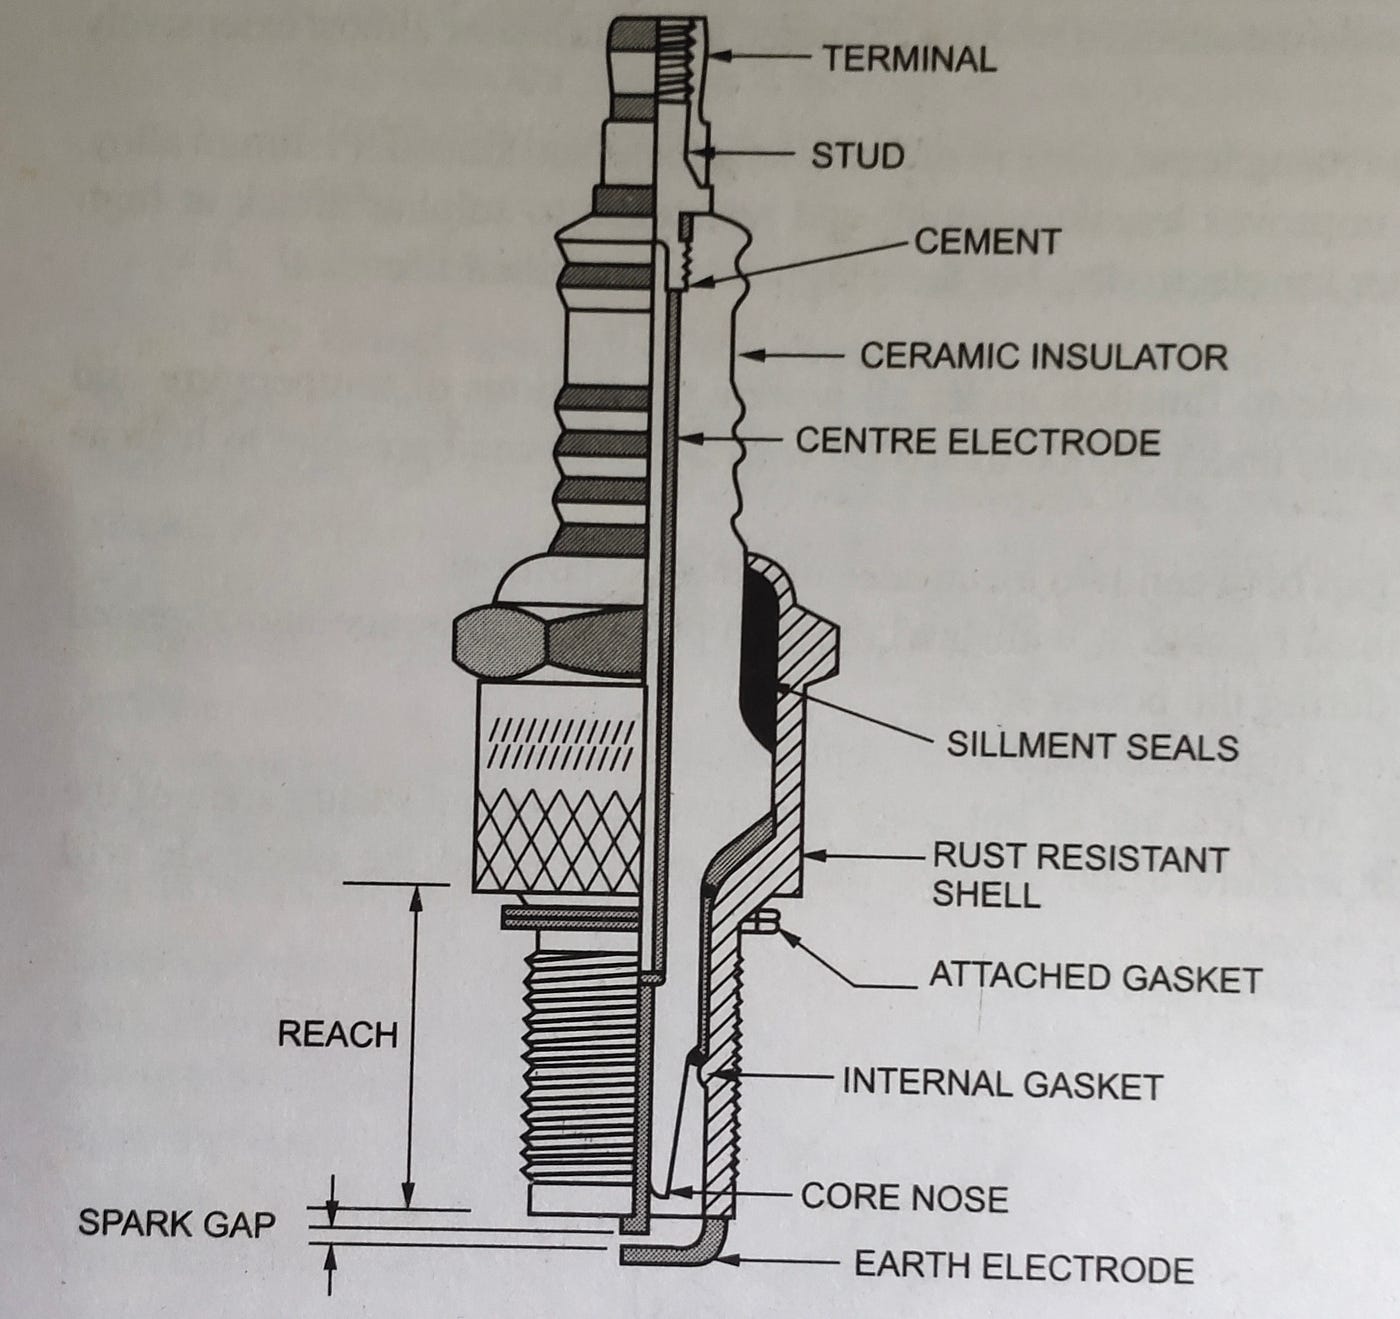 Spark Plug Diagram. The function of the spark plug is to…